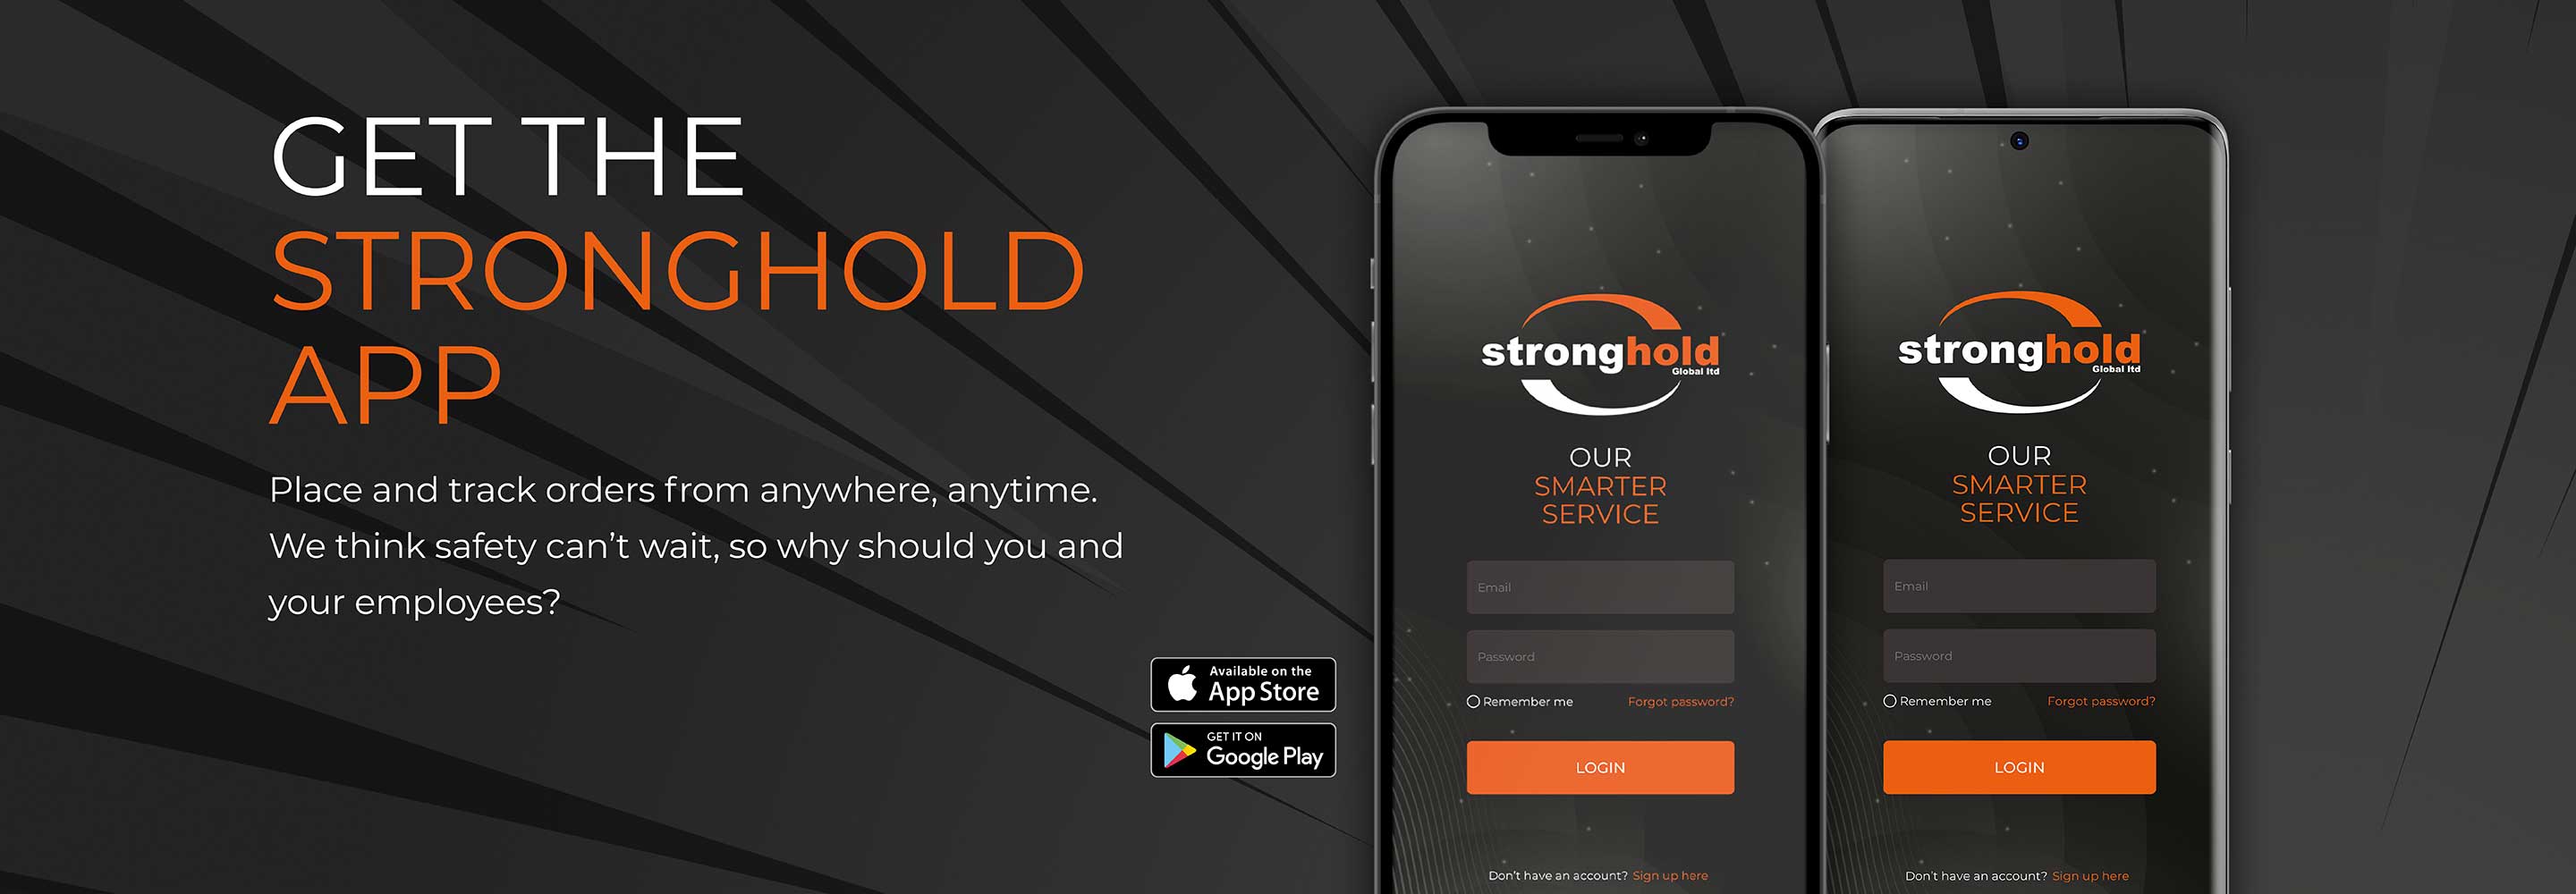 Apple and Android mobile phone showing the Stronghold App login page